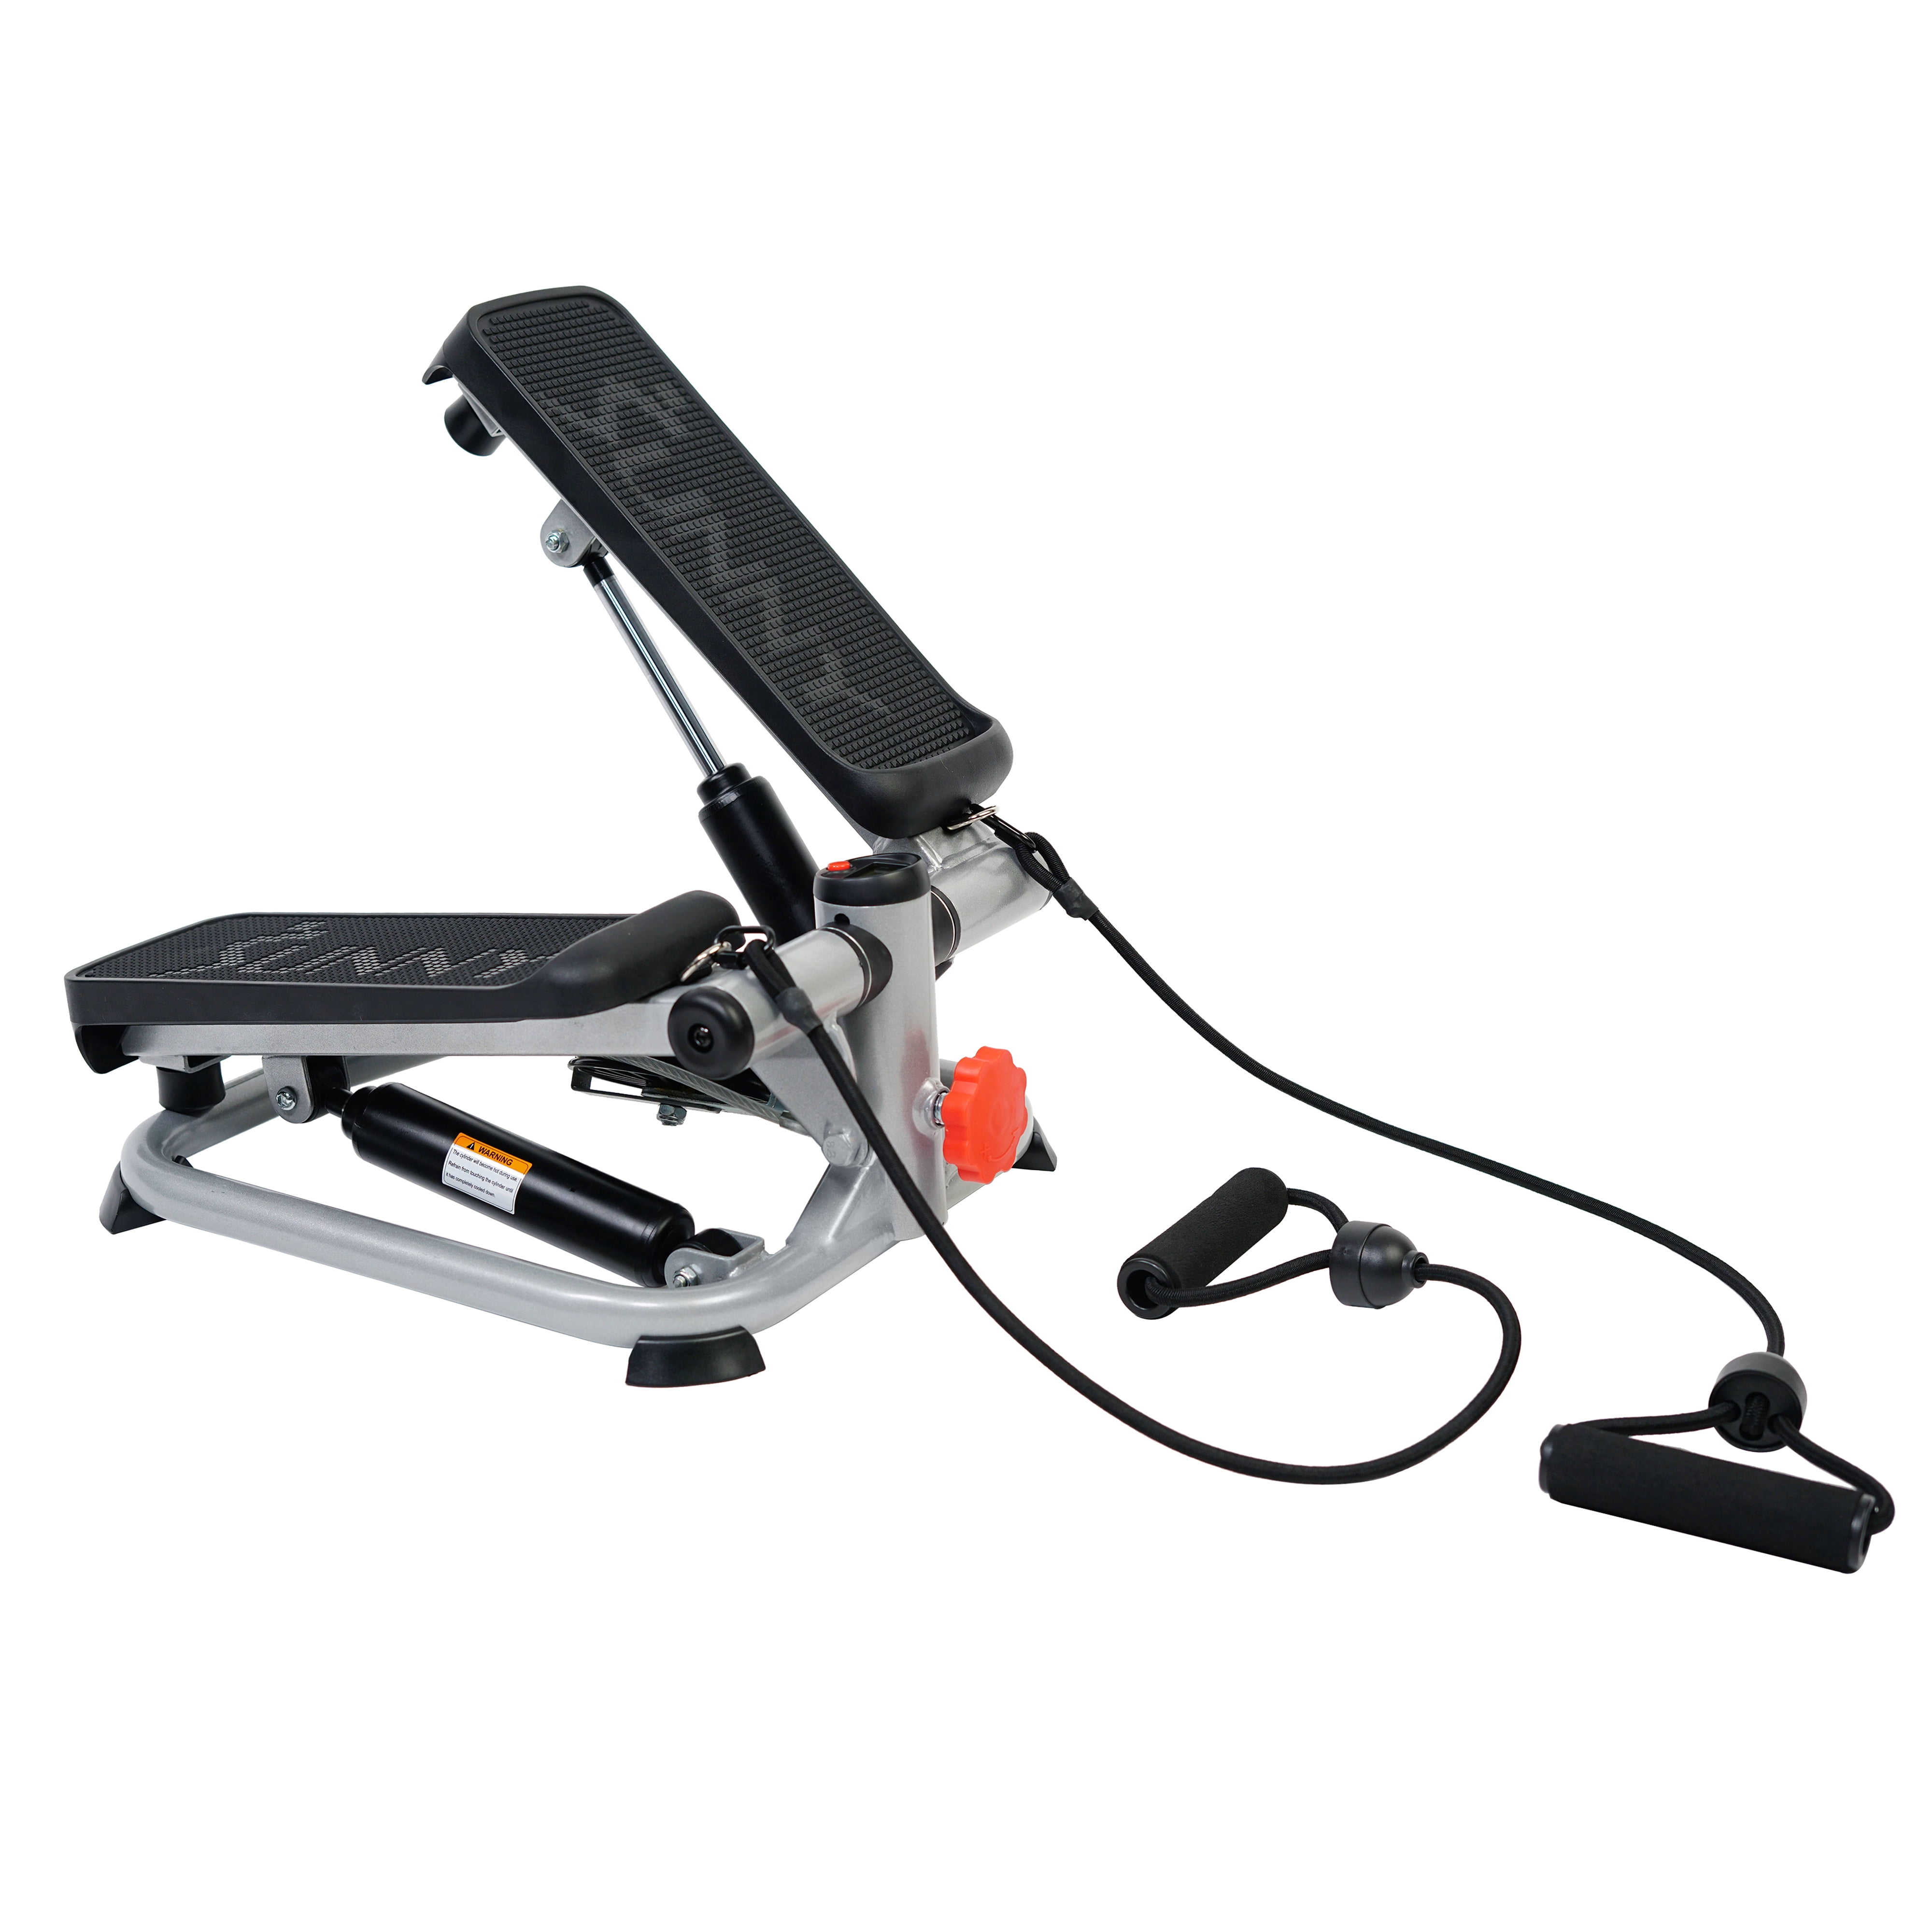 Portable Gym Exercise Pedal Stepper Cycle Bike Fitness Aerobic Trainer Home UK 